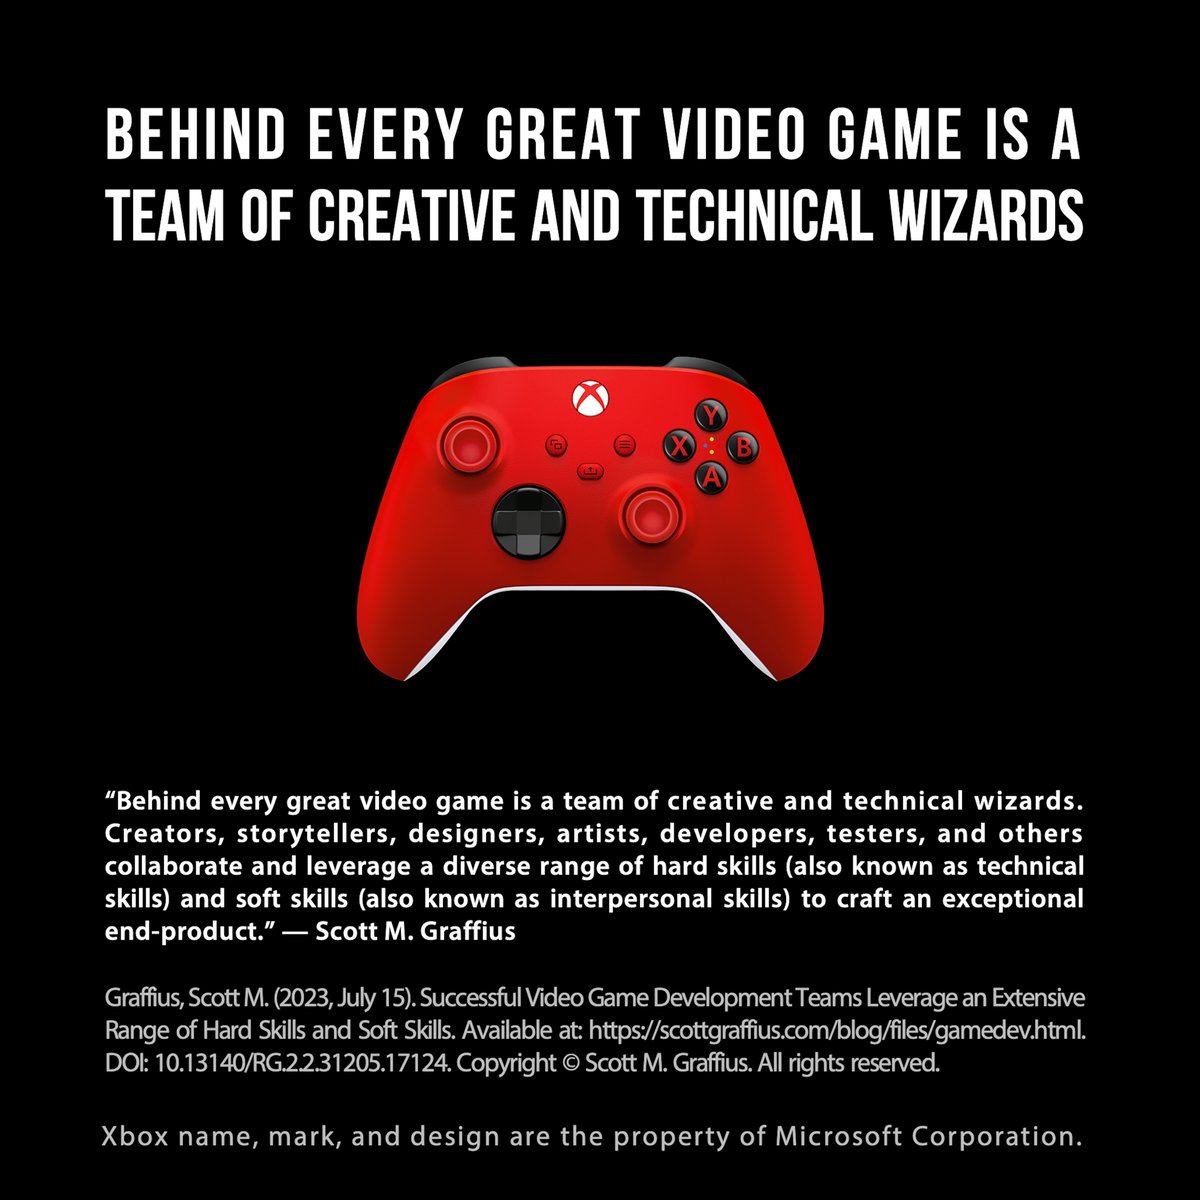 “Behind every great video game is a team of creative and technical wizards” ⏐ scottgraffius.com/blog/files/gam… ⏐ #Game #Gaming #Gameplay #VideoGame #IndieGame #GameDev #IndieDev #VideoGame #VideoGameDev #TeamDevelopment #Teamwork #Teamcraft #GamingIndustry #GamingCulture #Software #Dev